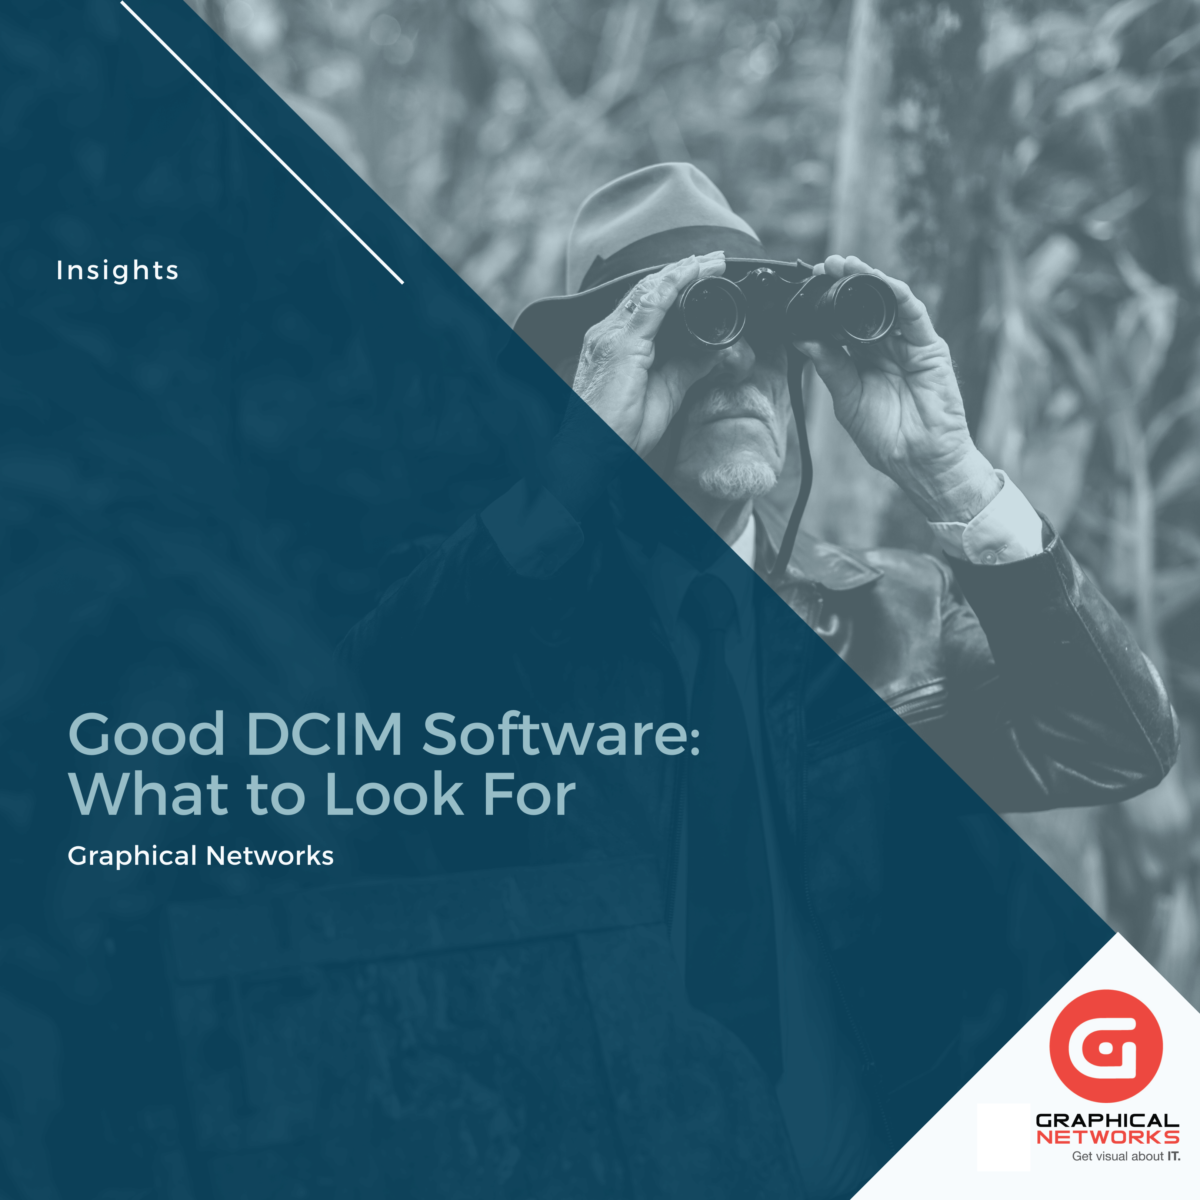 Good DCIM Software: What to Look For